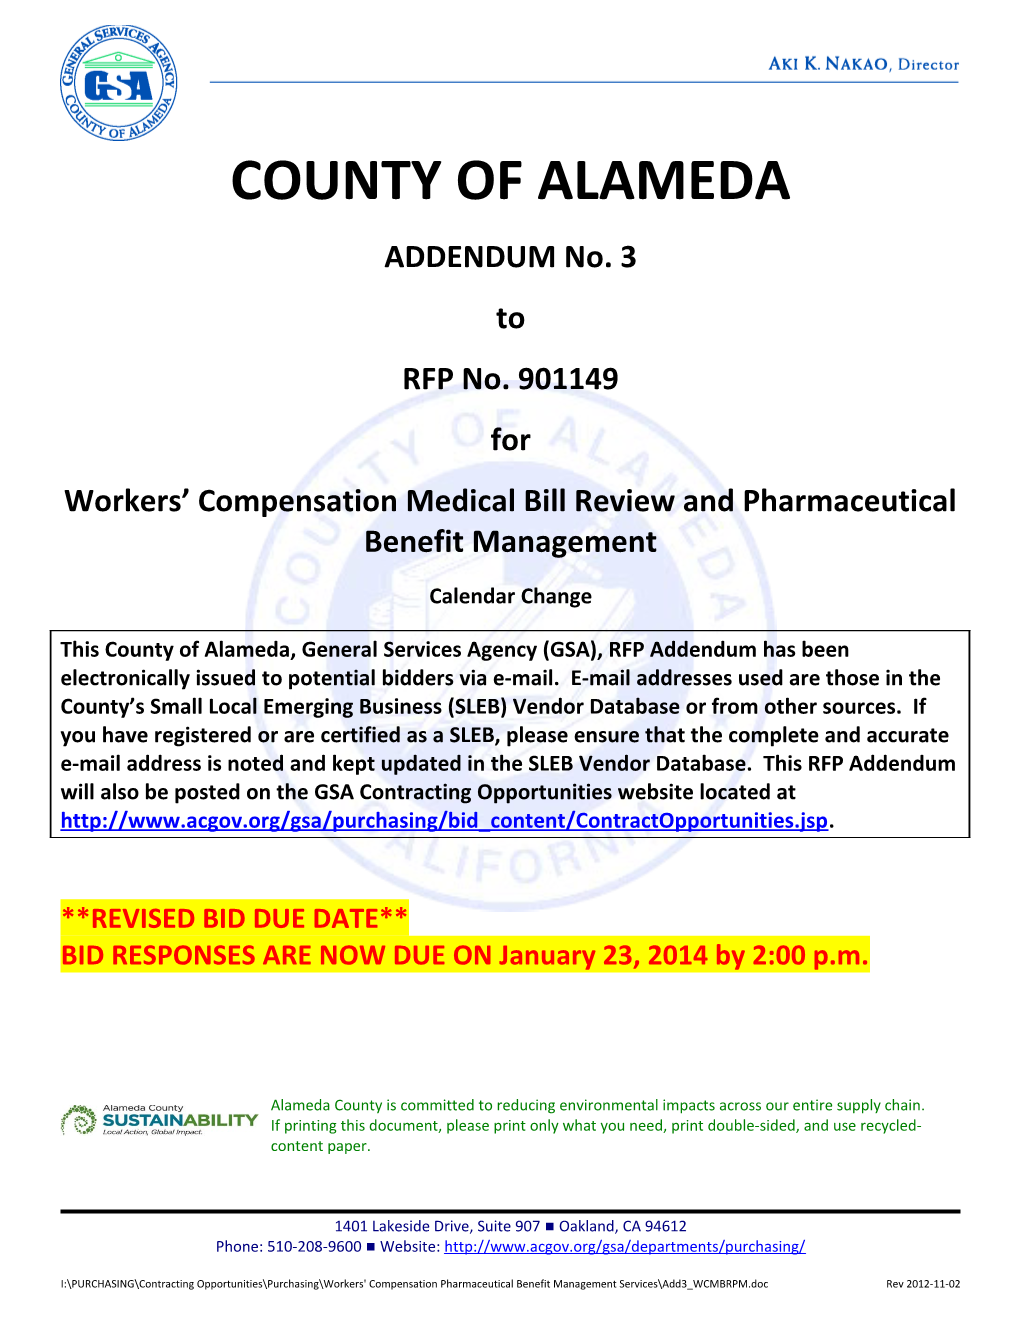 Workers Compensation Medical Bill Review and Pharmaceutical Benefit Management